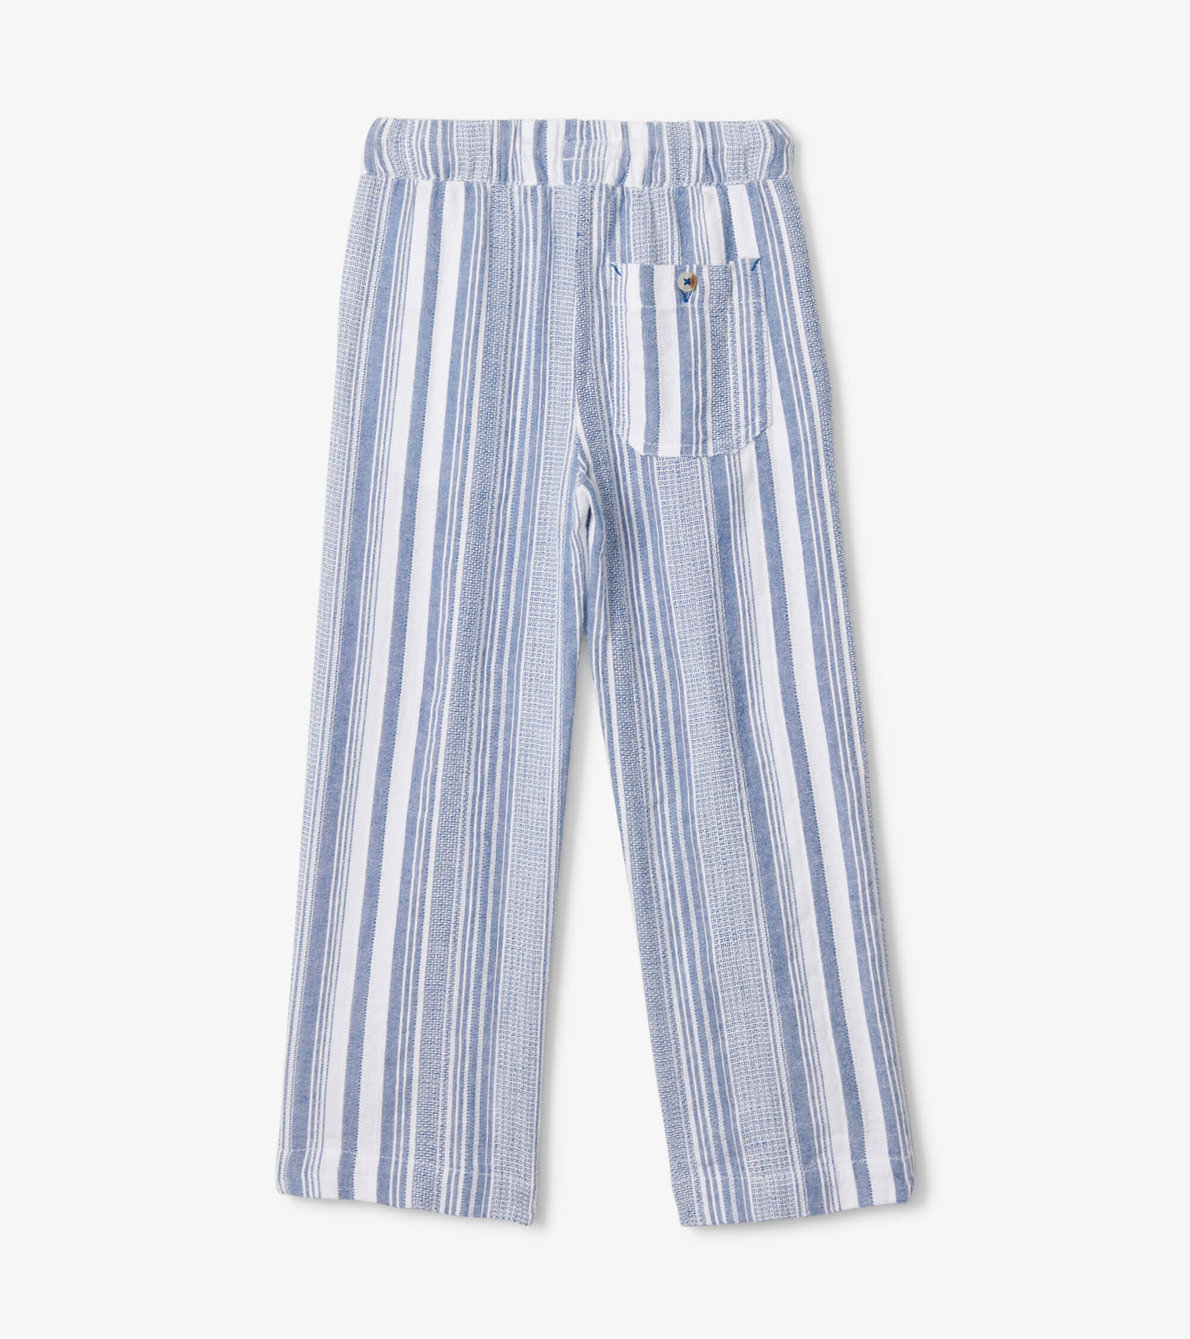 View larger image of Blue Stripes Relaxed Pant